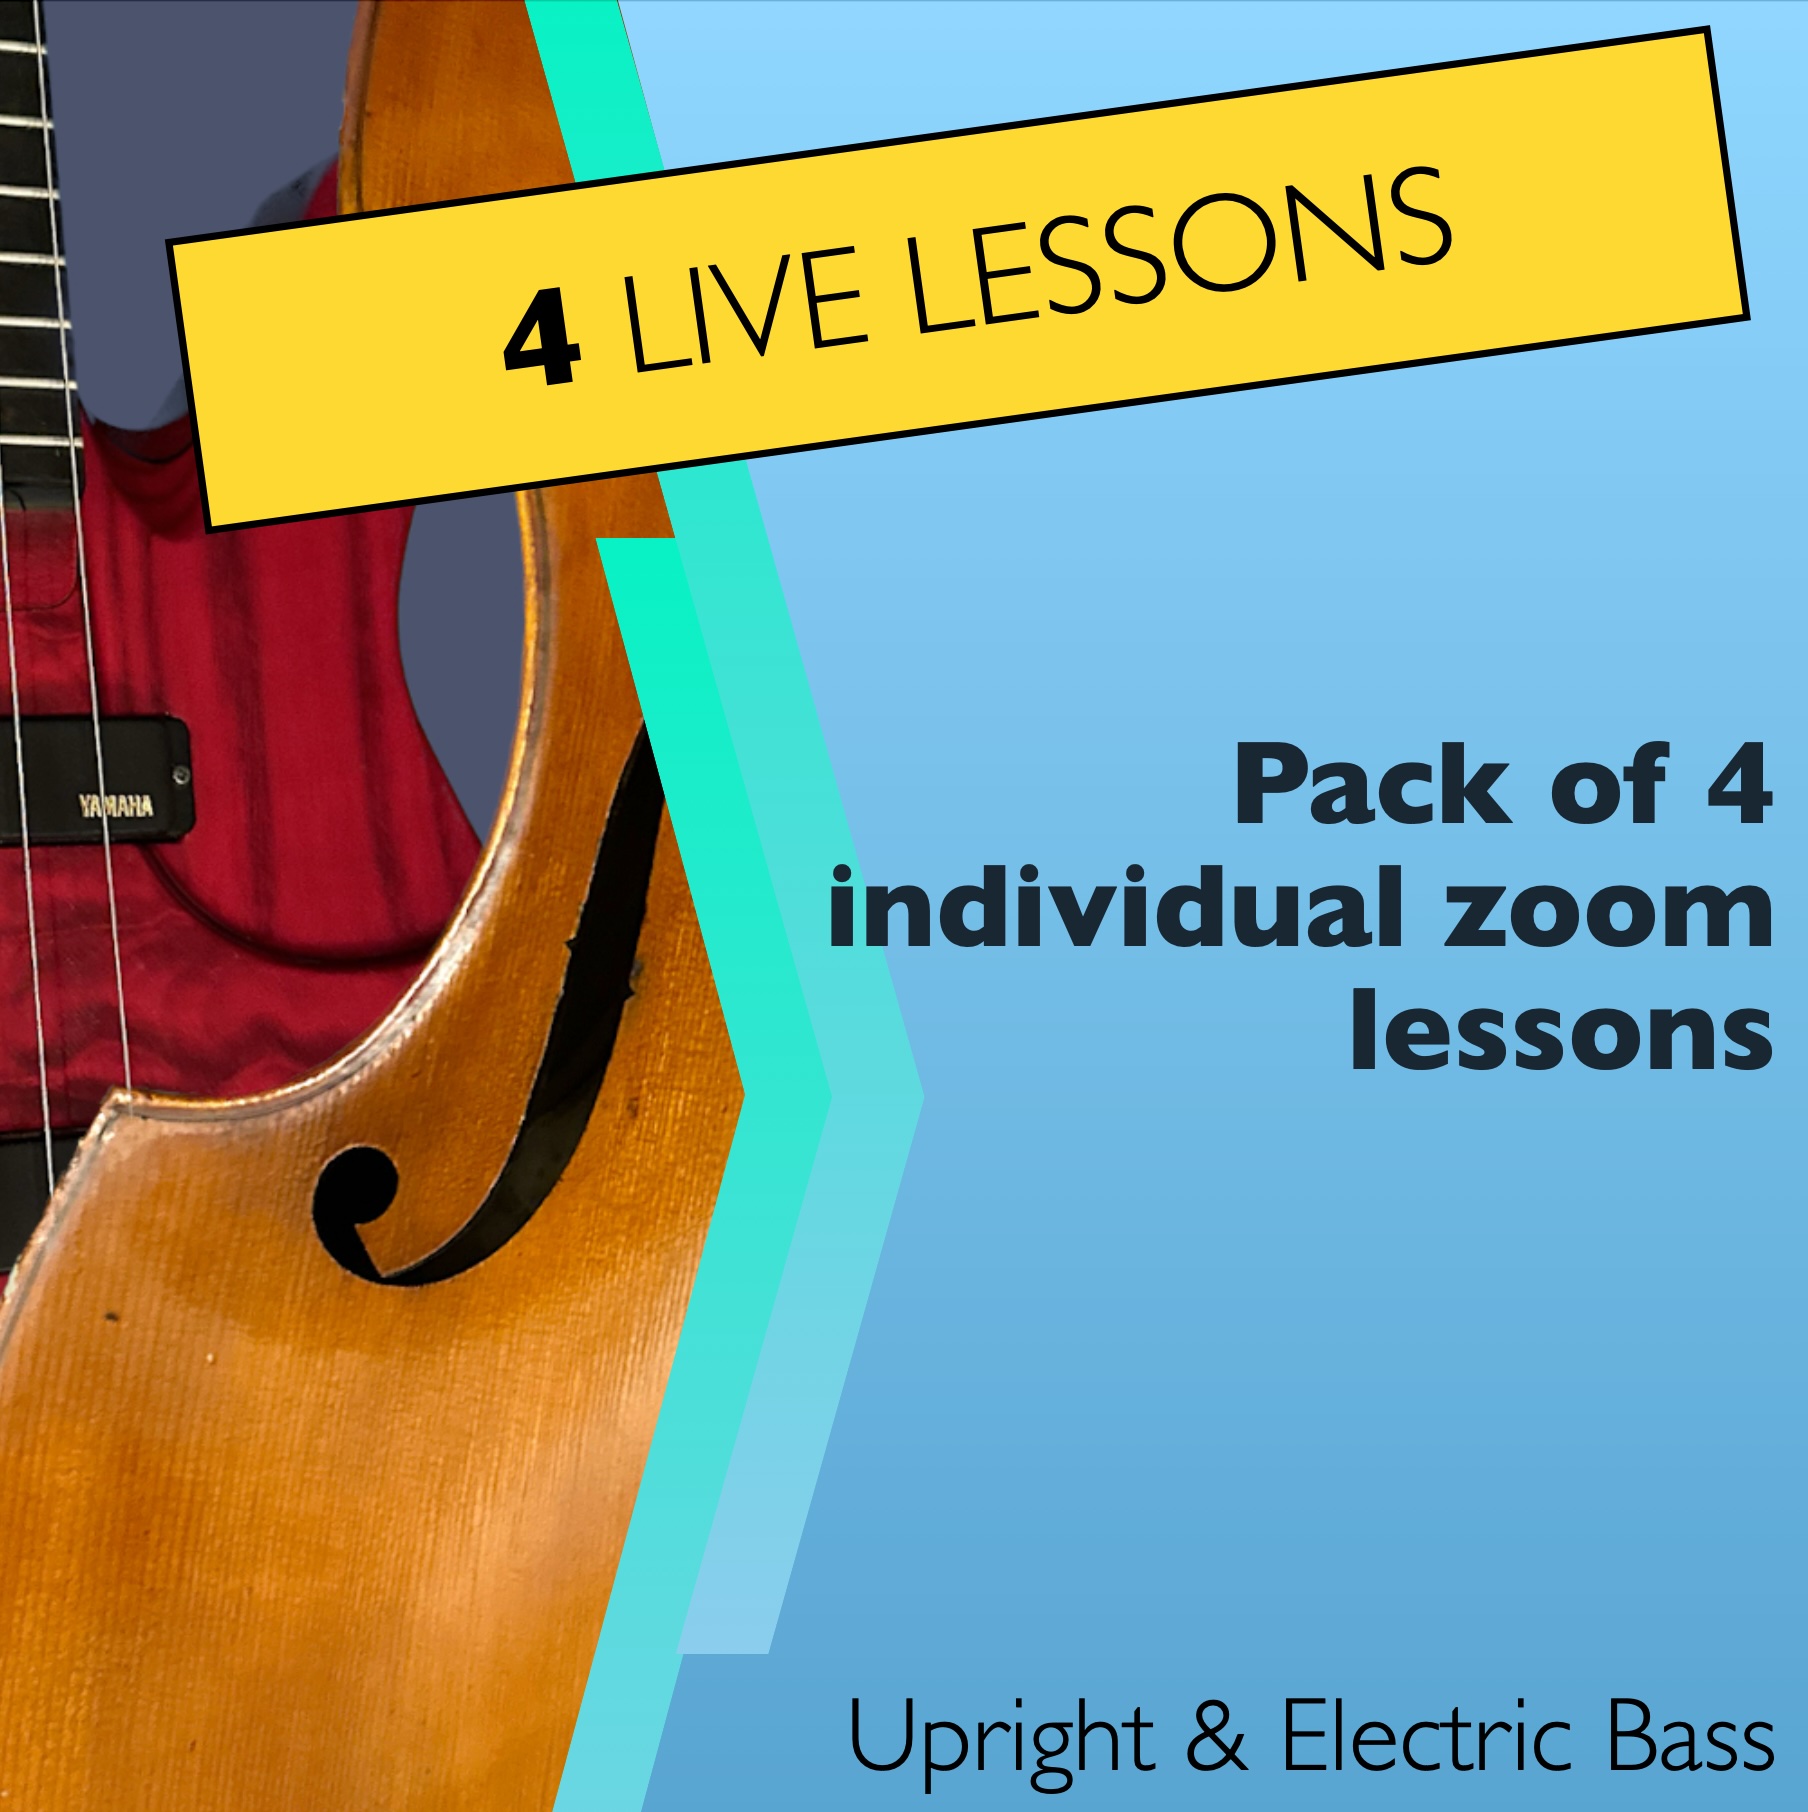 Pack of 4 individual zoom lessons